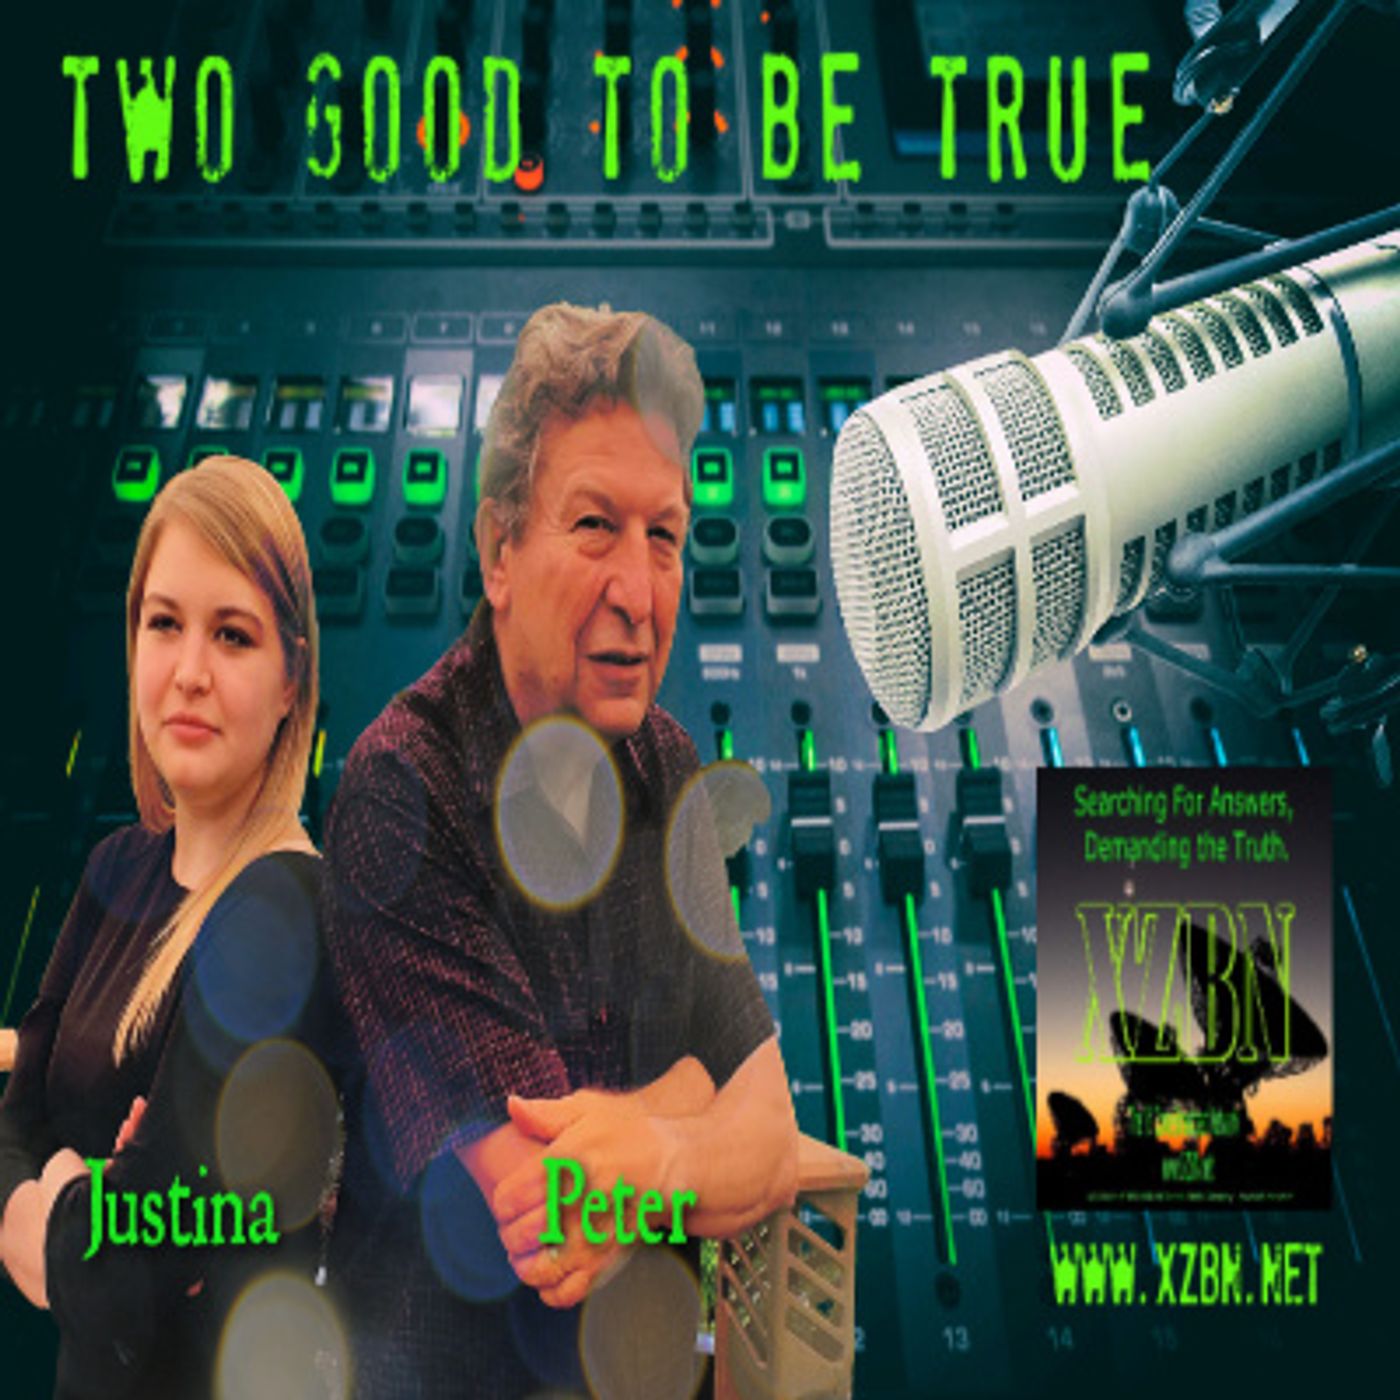 Two Good To Be True with Justina Marsh and Peter Marsh